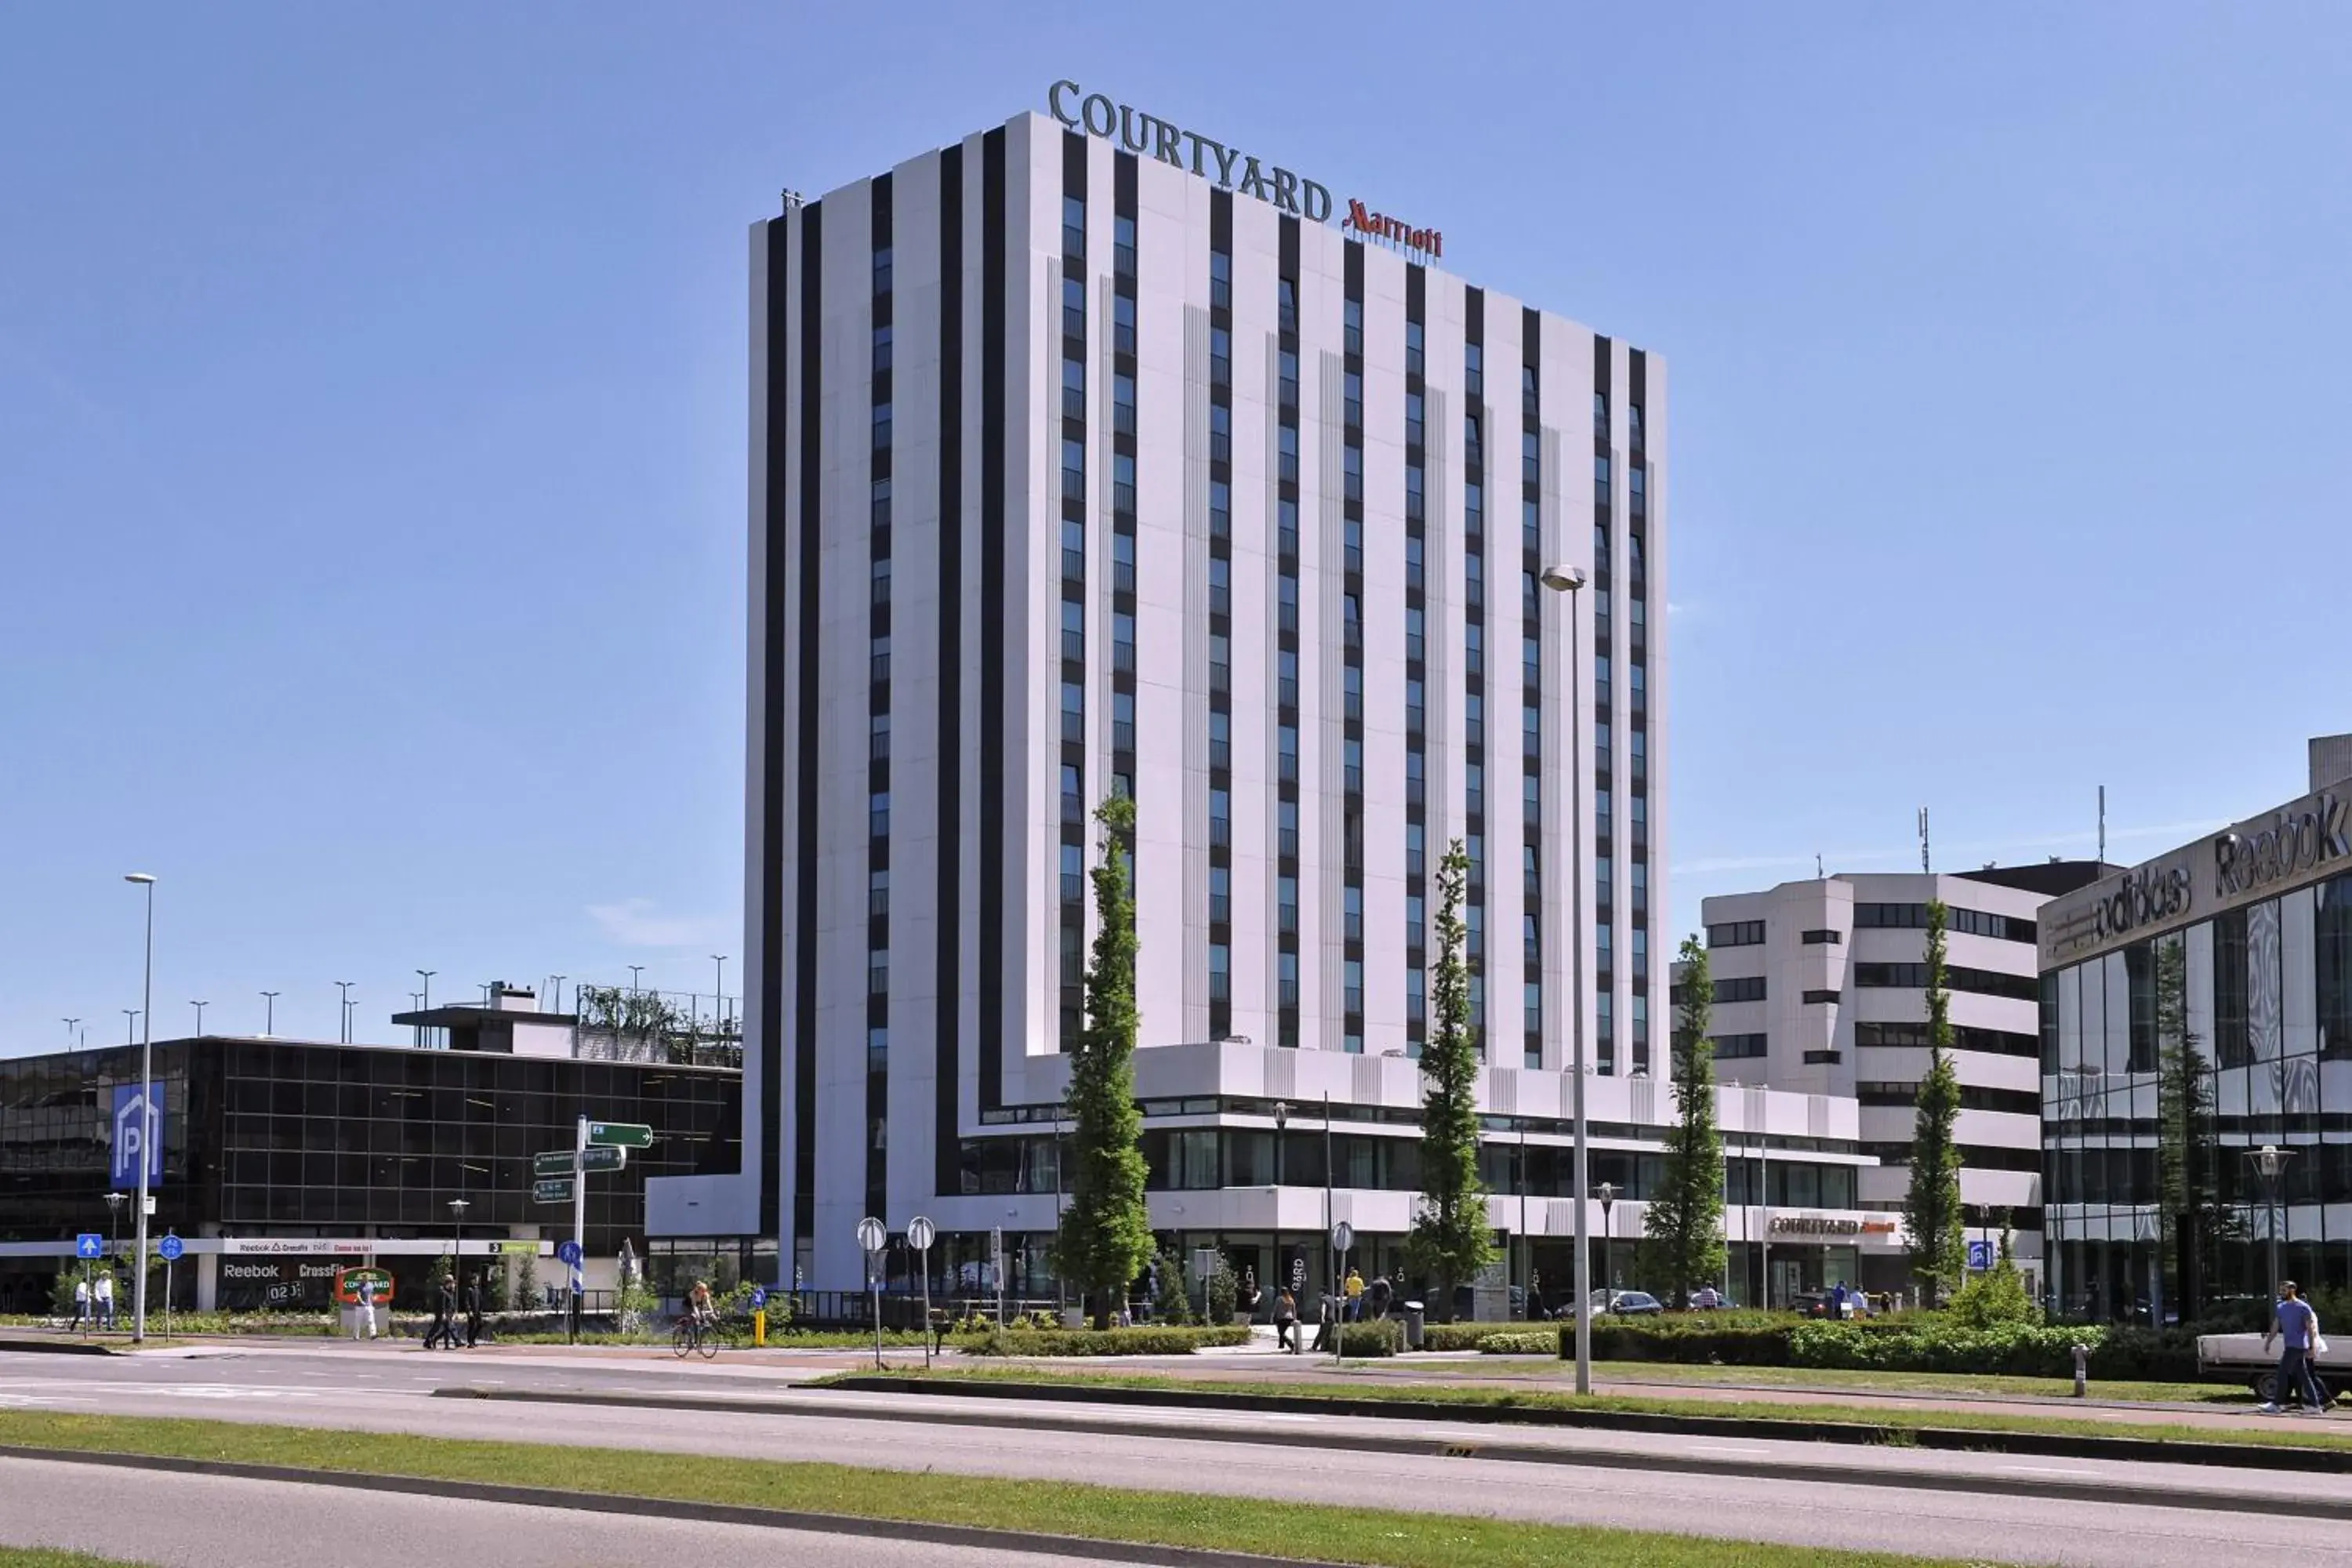 Property Building in Courtyard by Marriott Amsterdam Arena Atlas